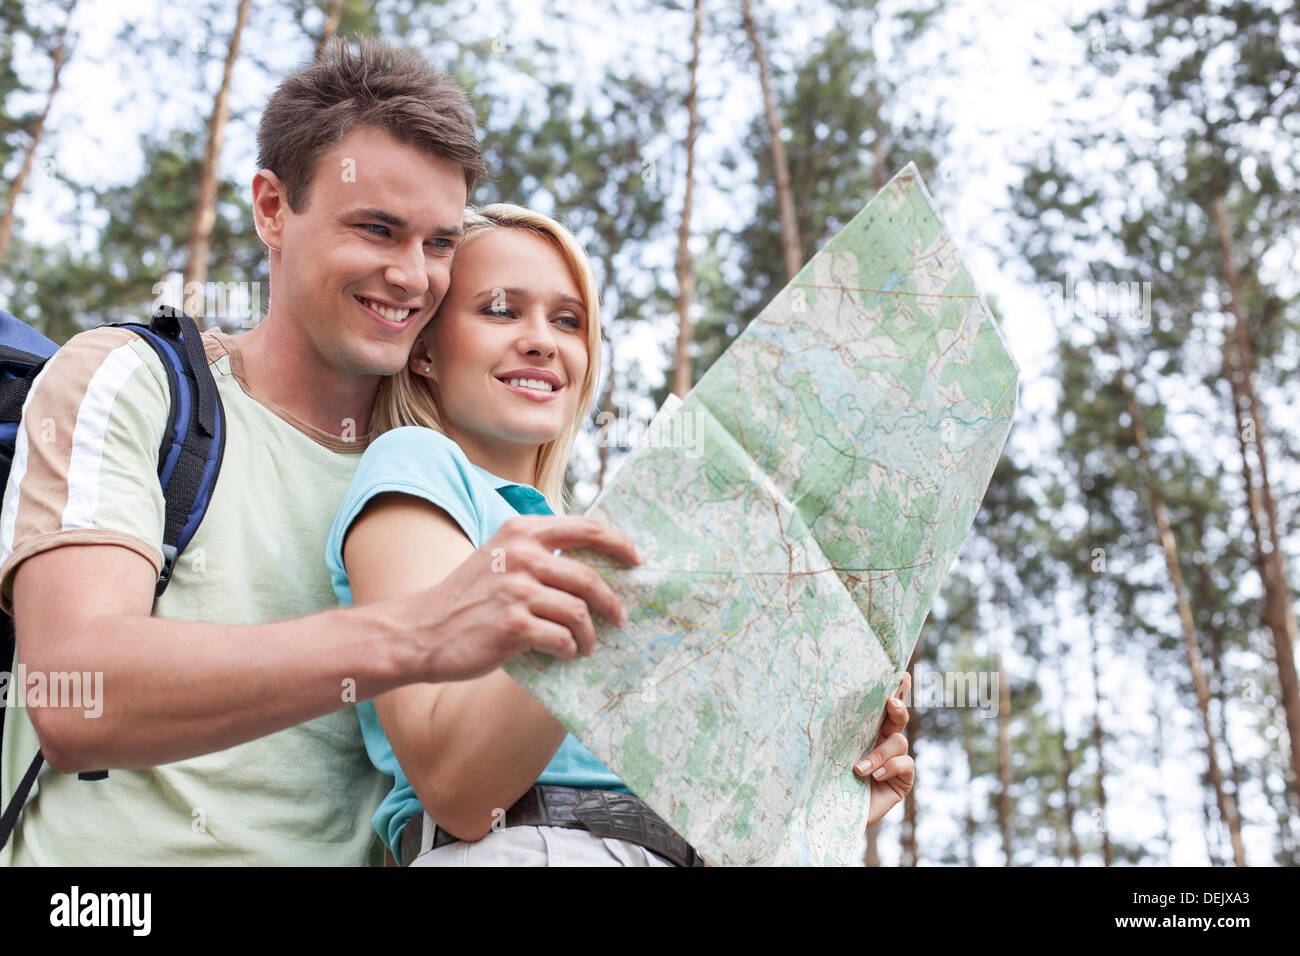 Happy young backpackers reading map forest Stock Photo